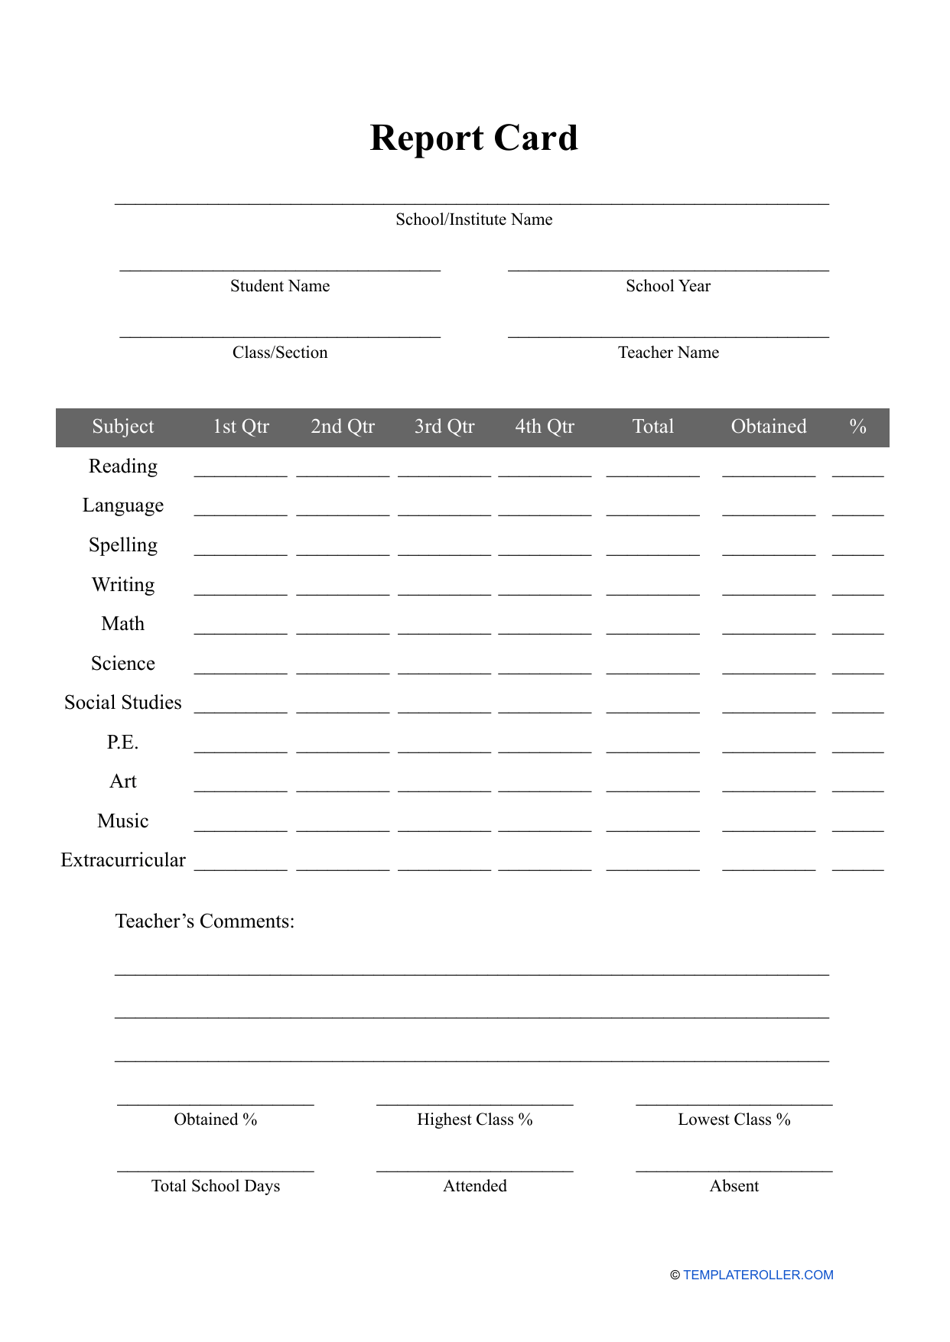 Report Card Template, Page 1